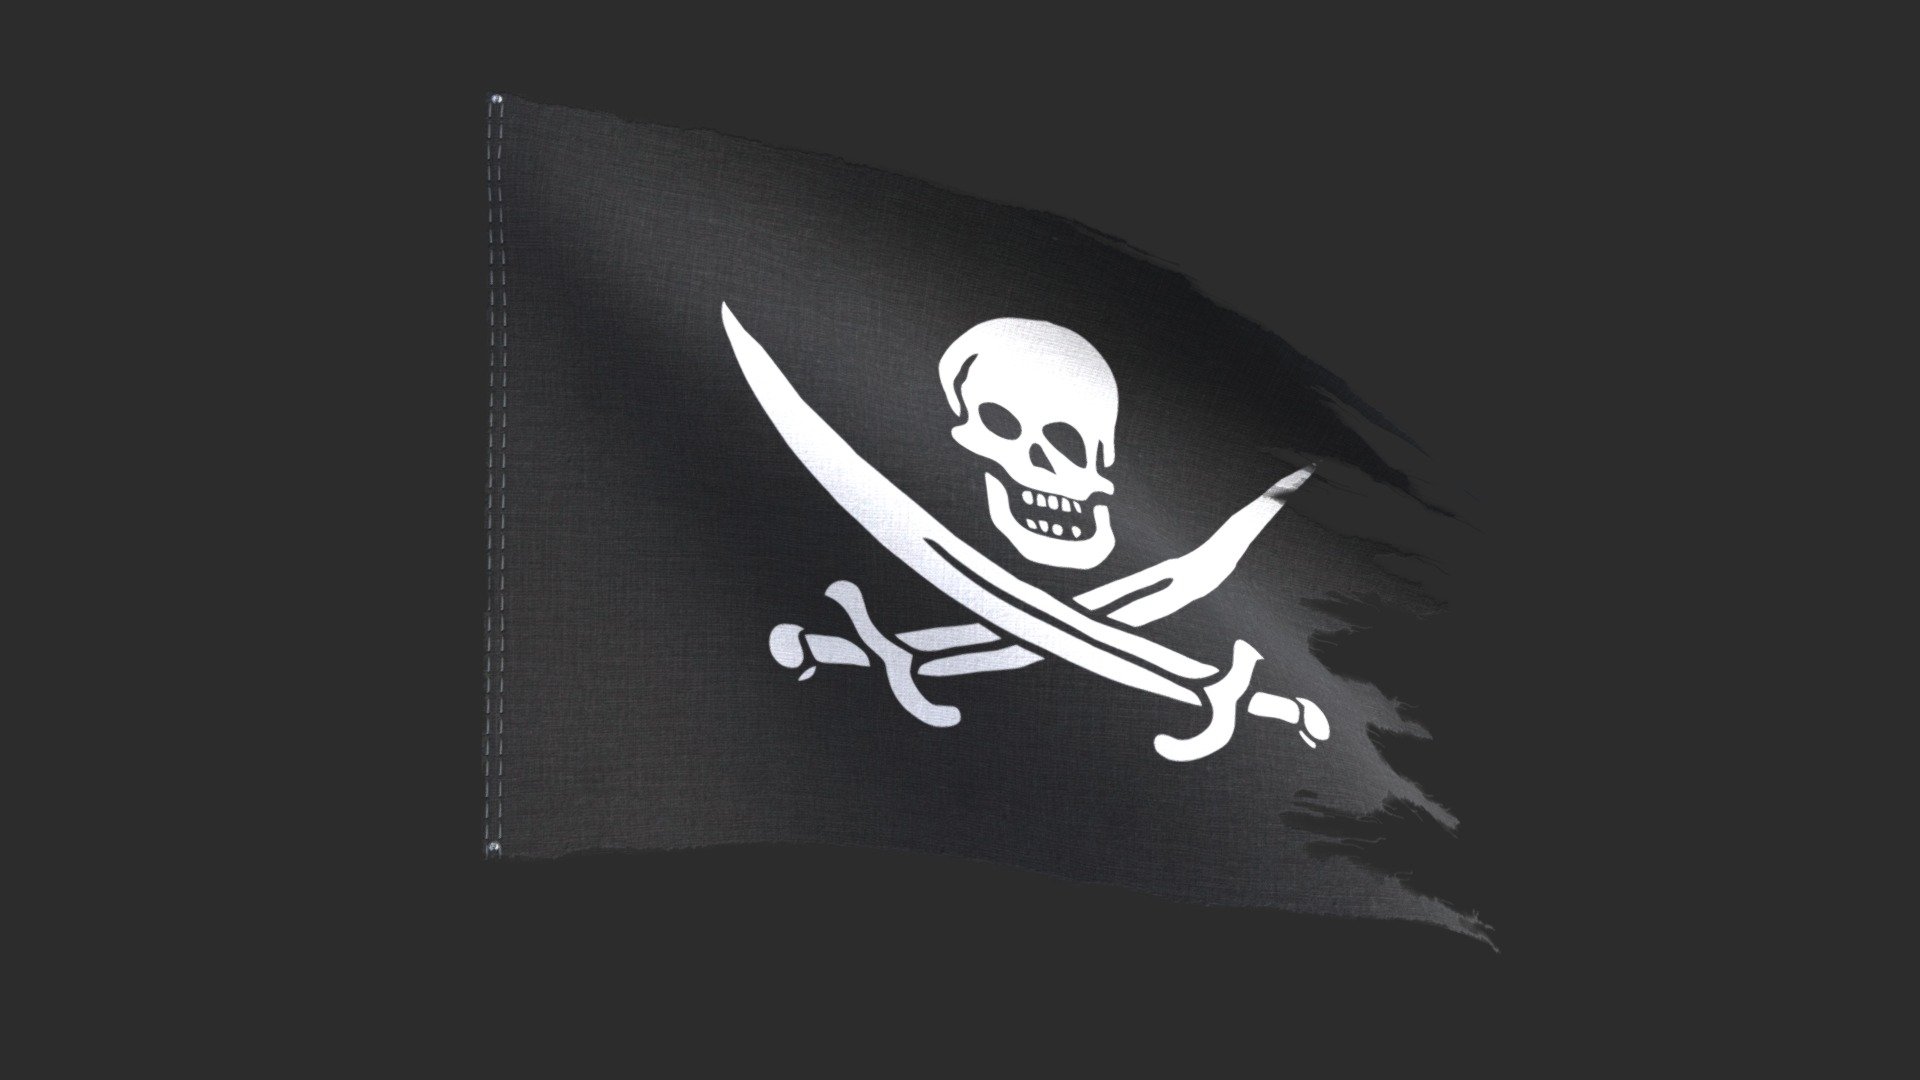 Hi folks, 

This is a test of 3D animated flag made in Blender with physics and shape keys to get a cyclic animation. Now I work to find the best way to export it in Unity or Unreal and implement in a game.

This version of textures is the official Jolly Roger flag of the famous and alcoholic pirate Calico Jack Rackham. Also used in the &ldquo;Pirates of Caribbeans